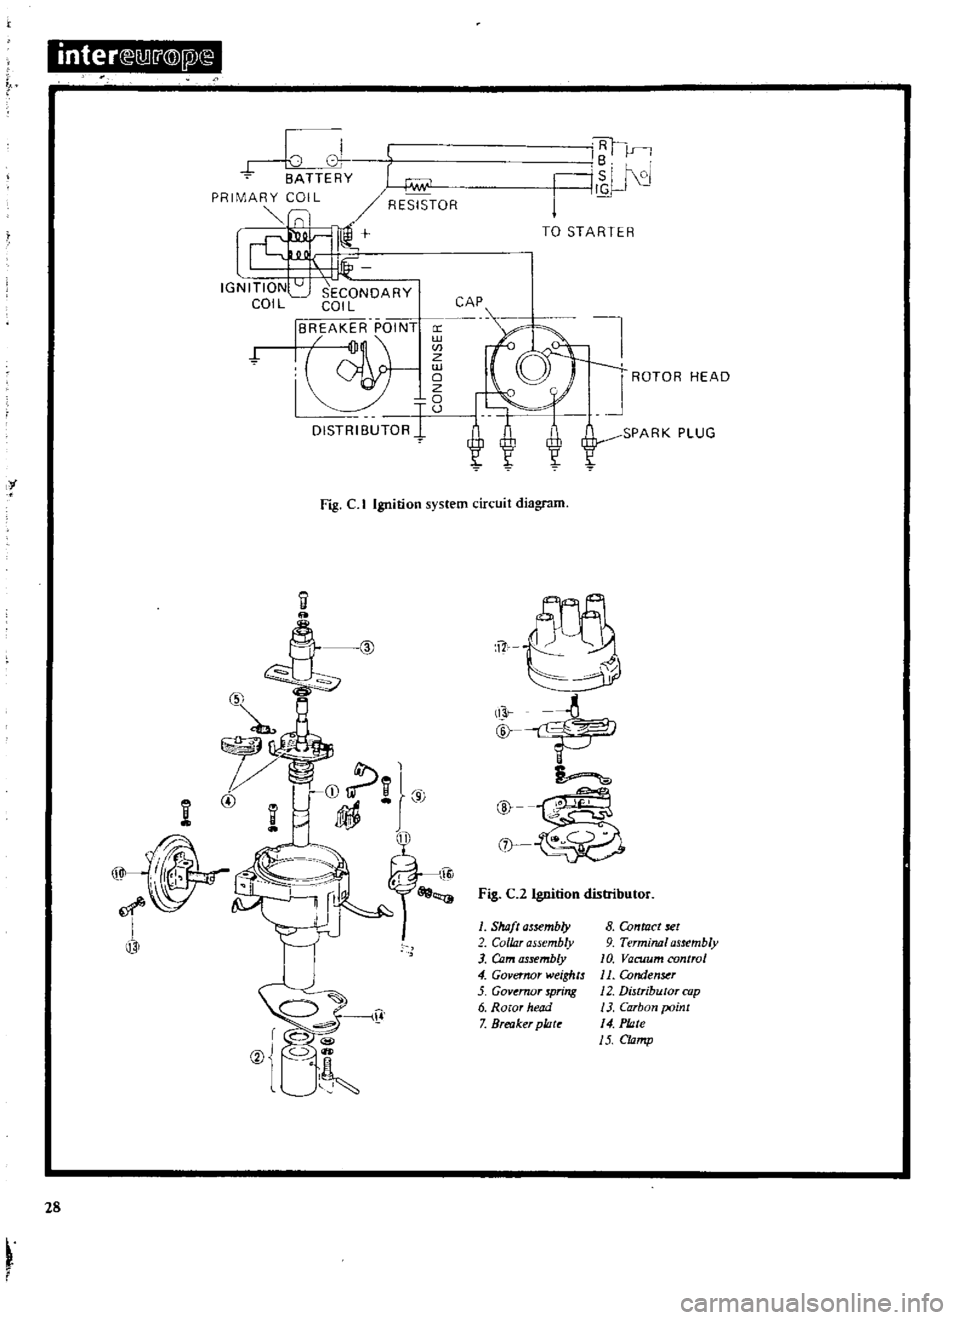 DATSUN 510 1969  Service Owners Manual 
inter 
lW
j

@lPX

TT 
Y

Gw

PRIMARY 
COIL

RESISTOR

I 
I

l1@

l 
I

IGNITION 
U

SECONDARY

COIL 
COIL

IS 
AK 
R 
POIN

i

1 
1

DISTRISUTOR

I

1 
J

ISI 
V

nl 
N

I

TO 
STARTER

l

1 
ROTOR 